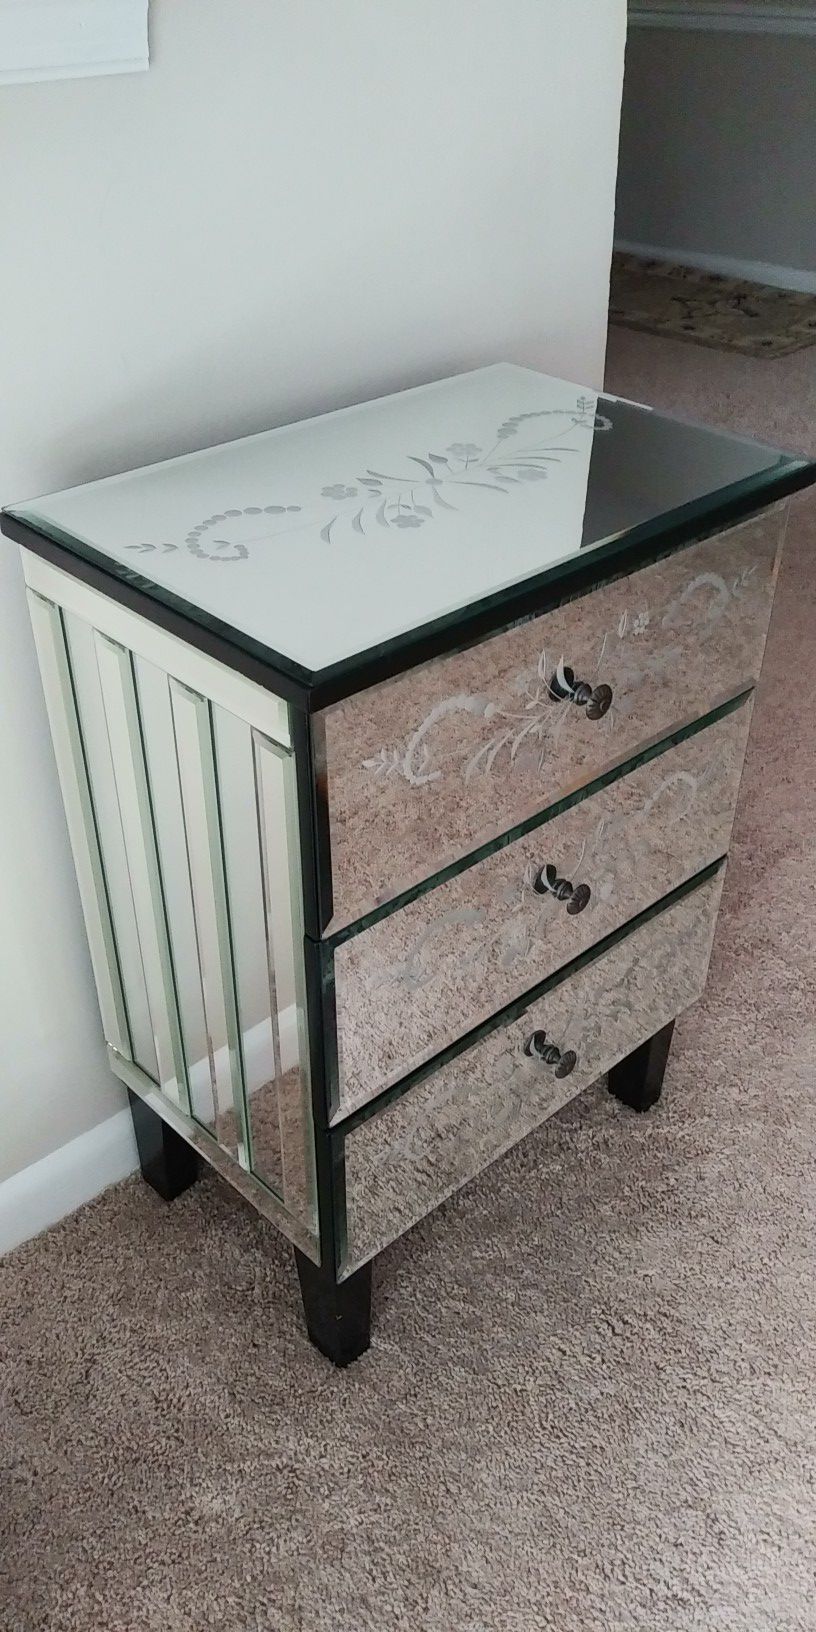 Chest of drawers covered in mirrors